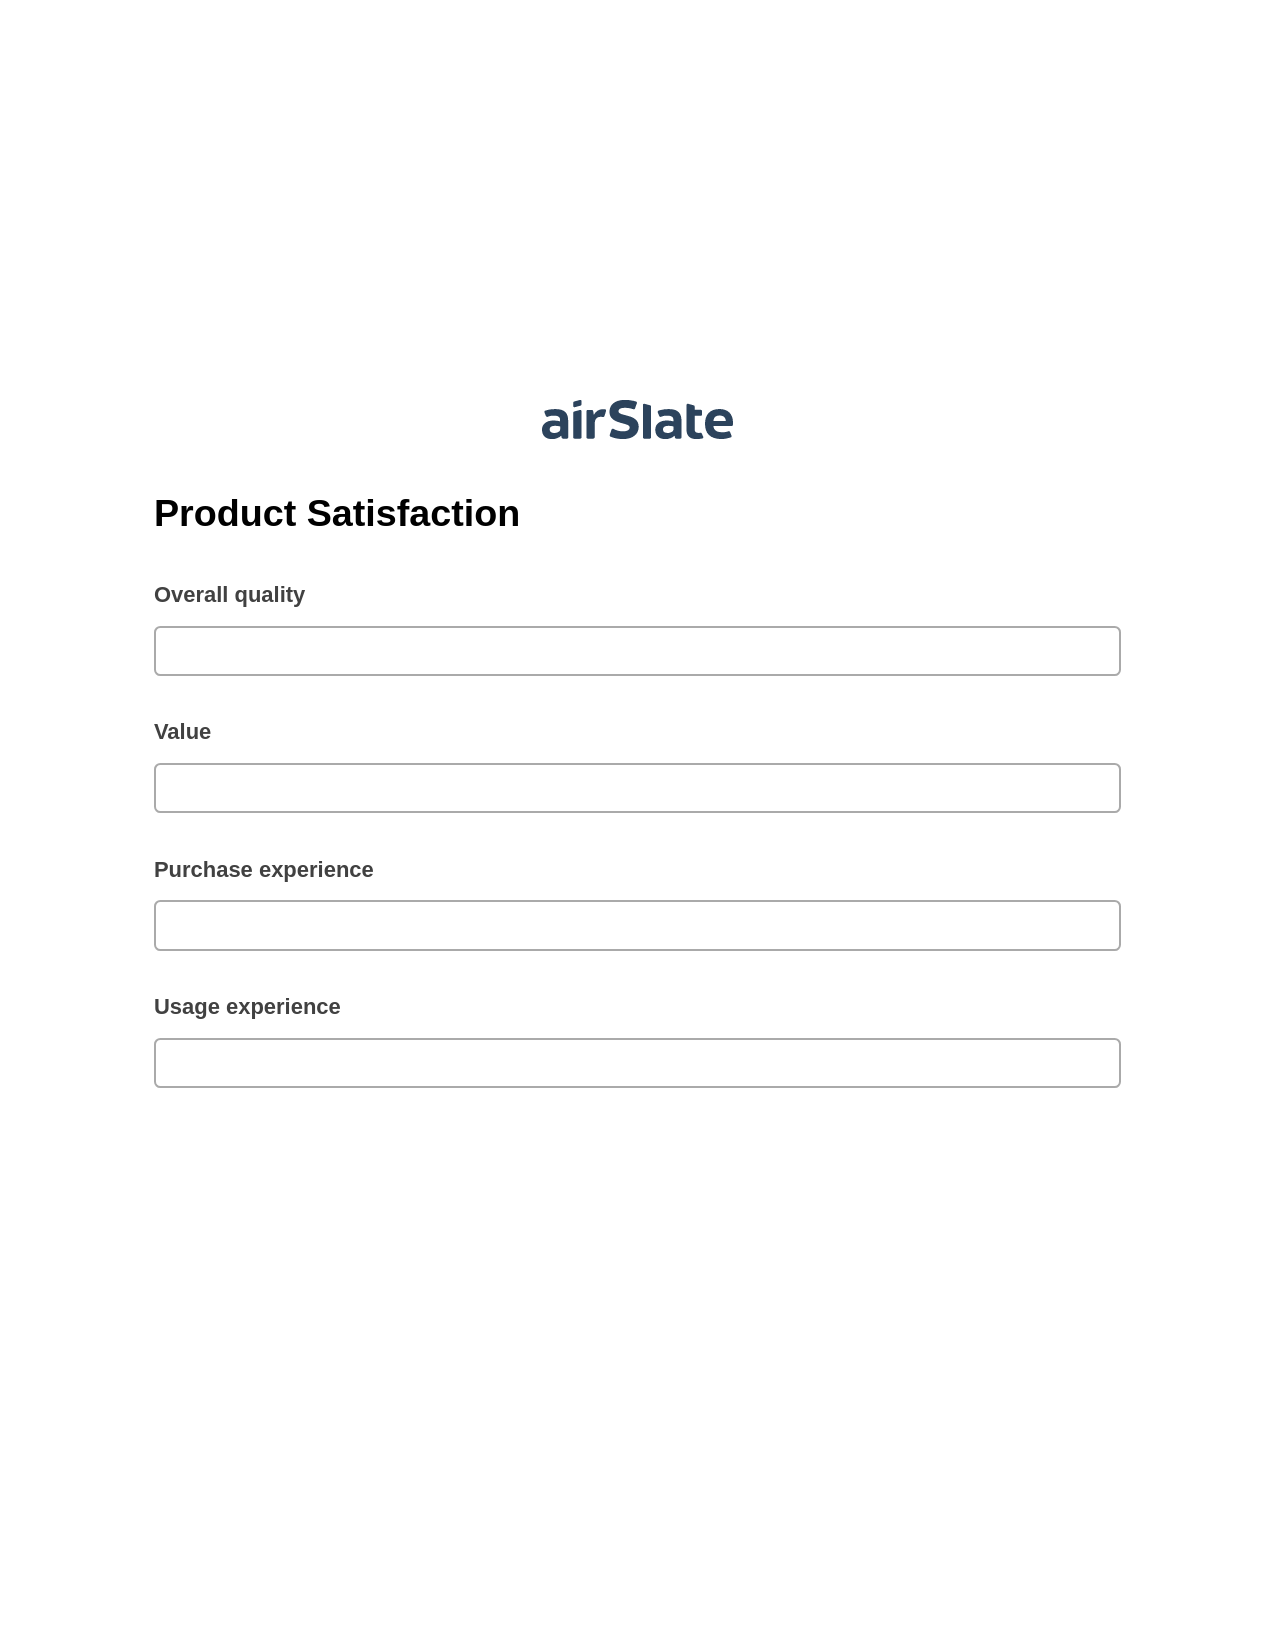 Product Satisfaction Pre-fill from another Slate Bot, Create slate bot, Post-finish Document Bot